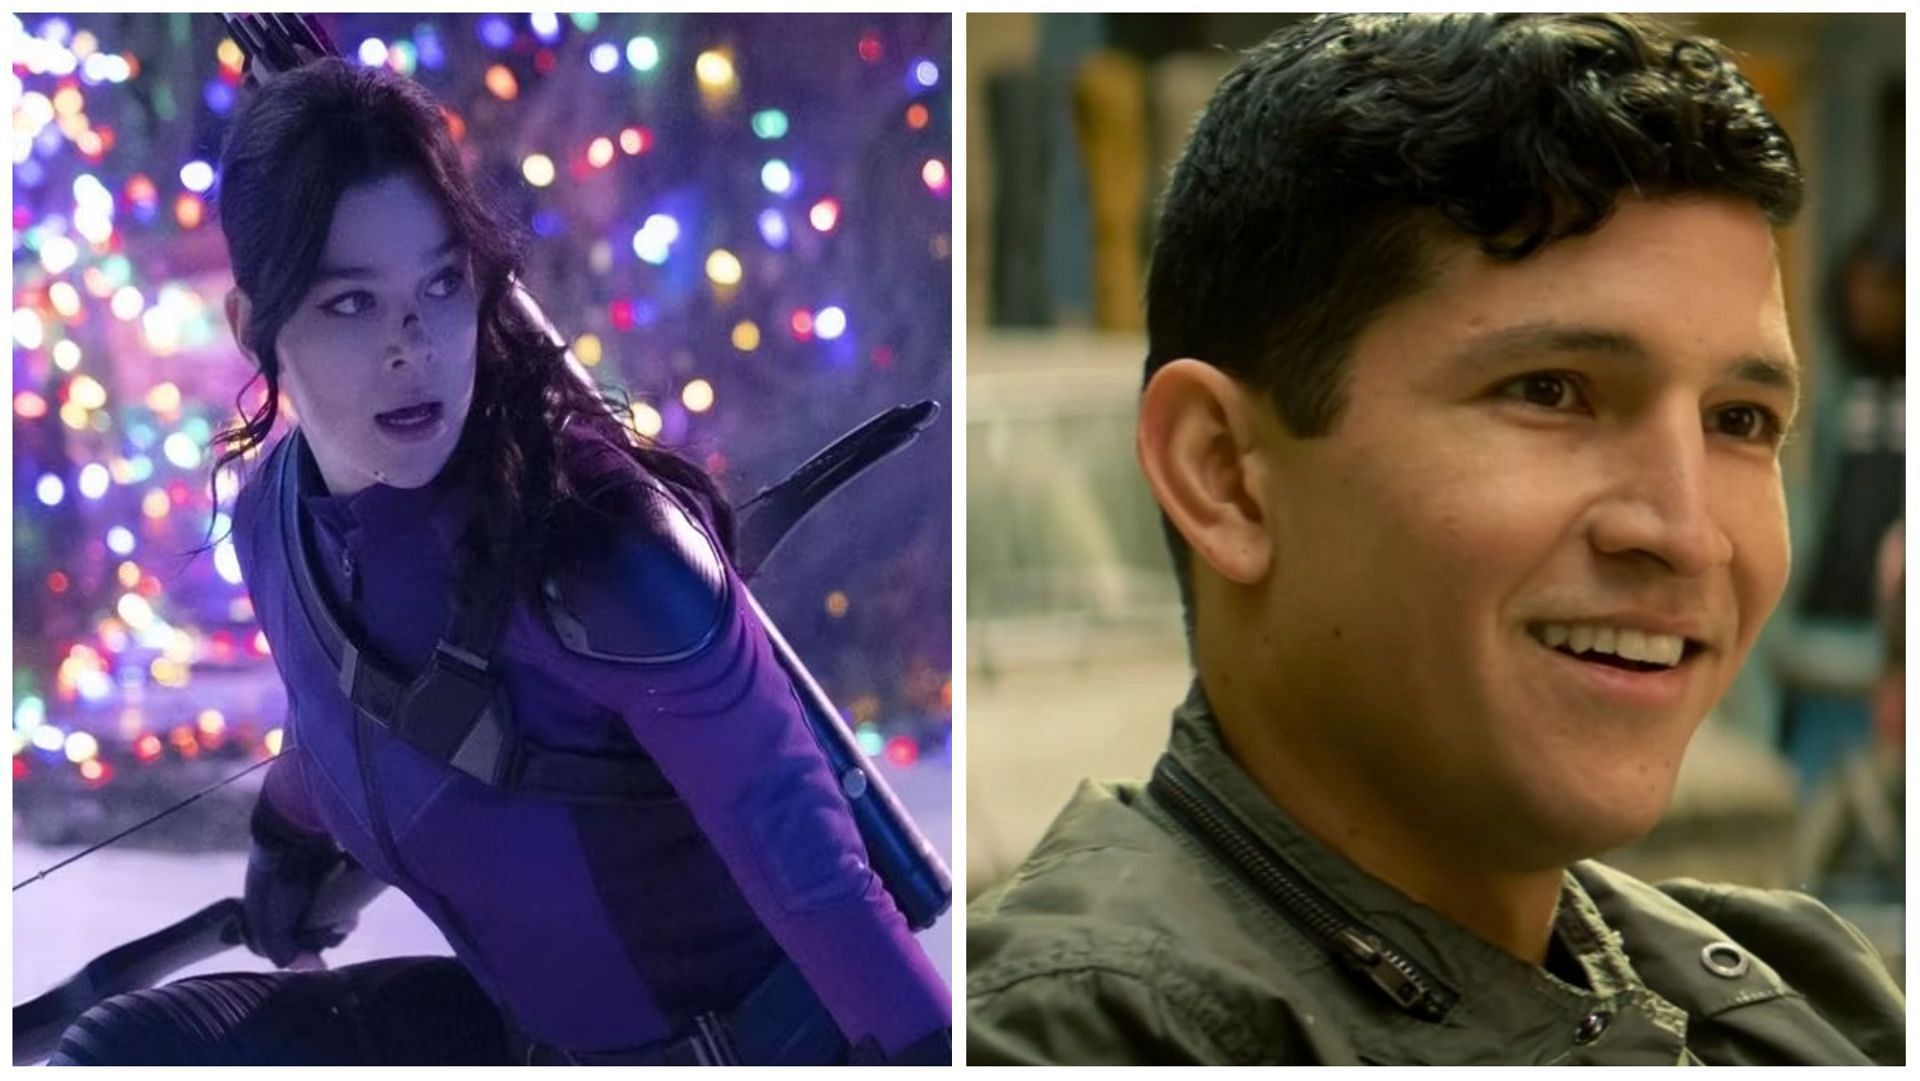 Kate Bishop and Joaquin Torres could lead the Young Avengers (Images via Marvel Studios)